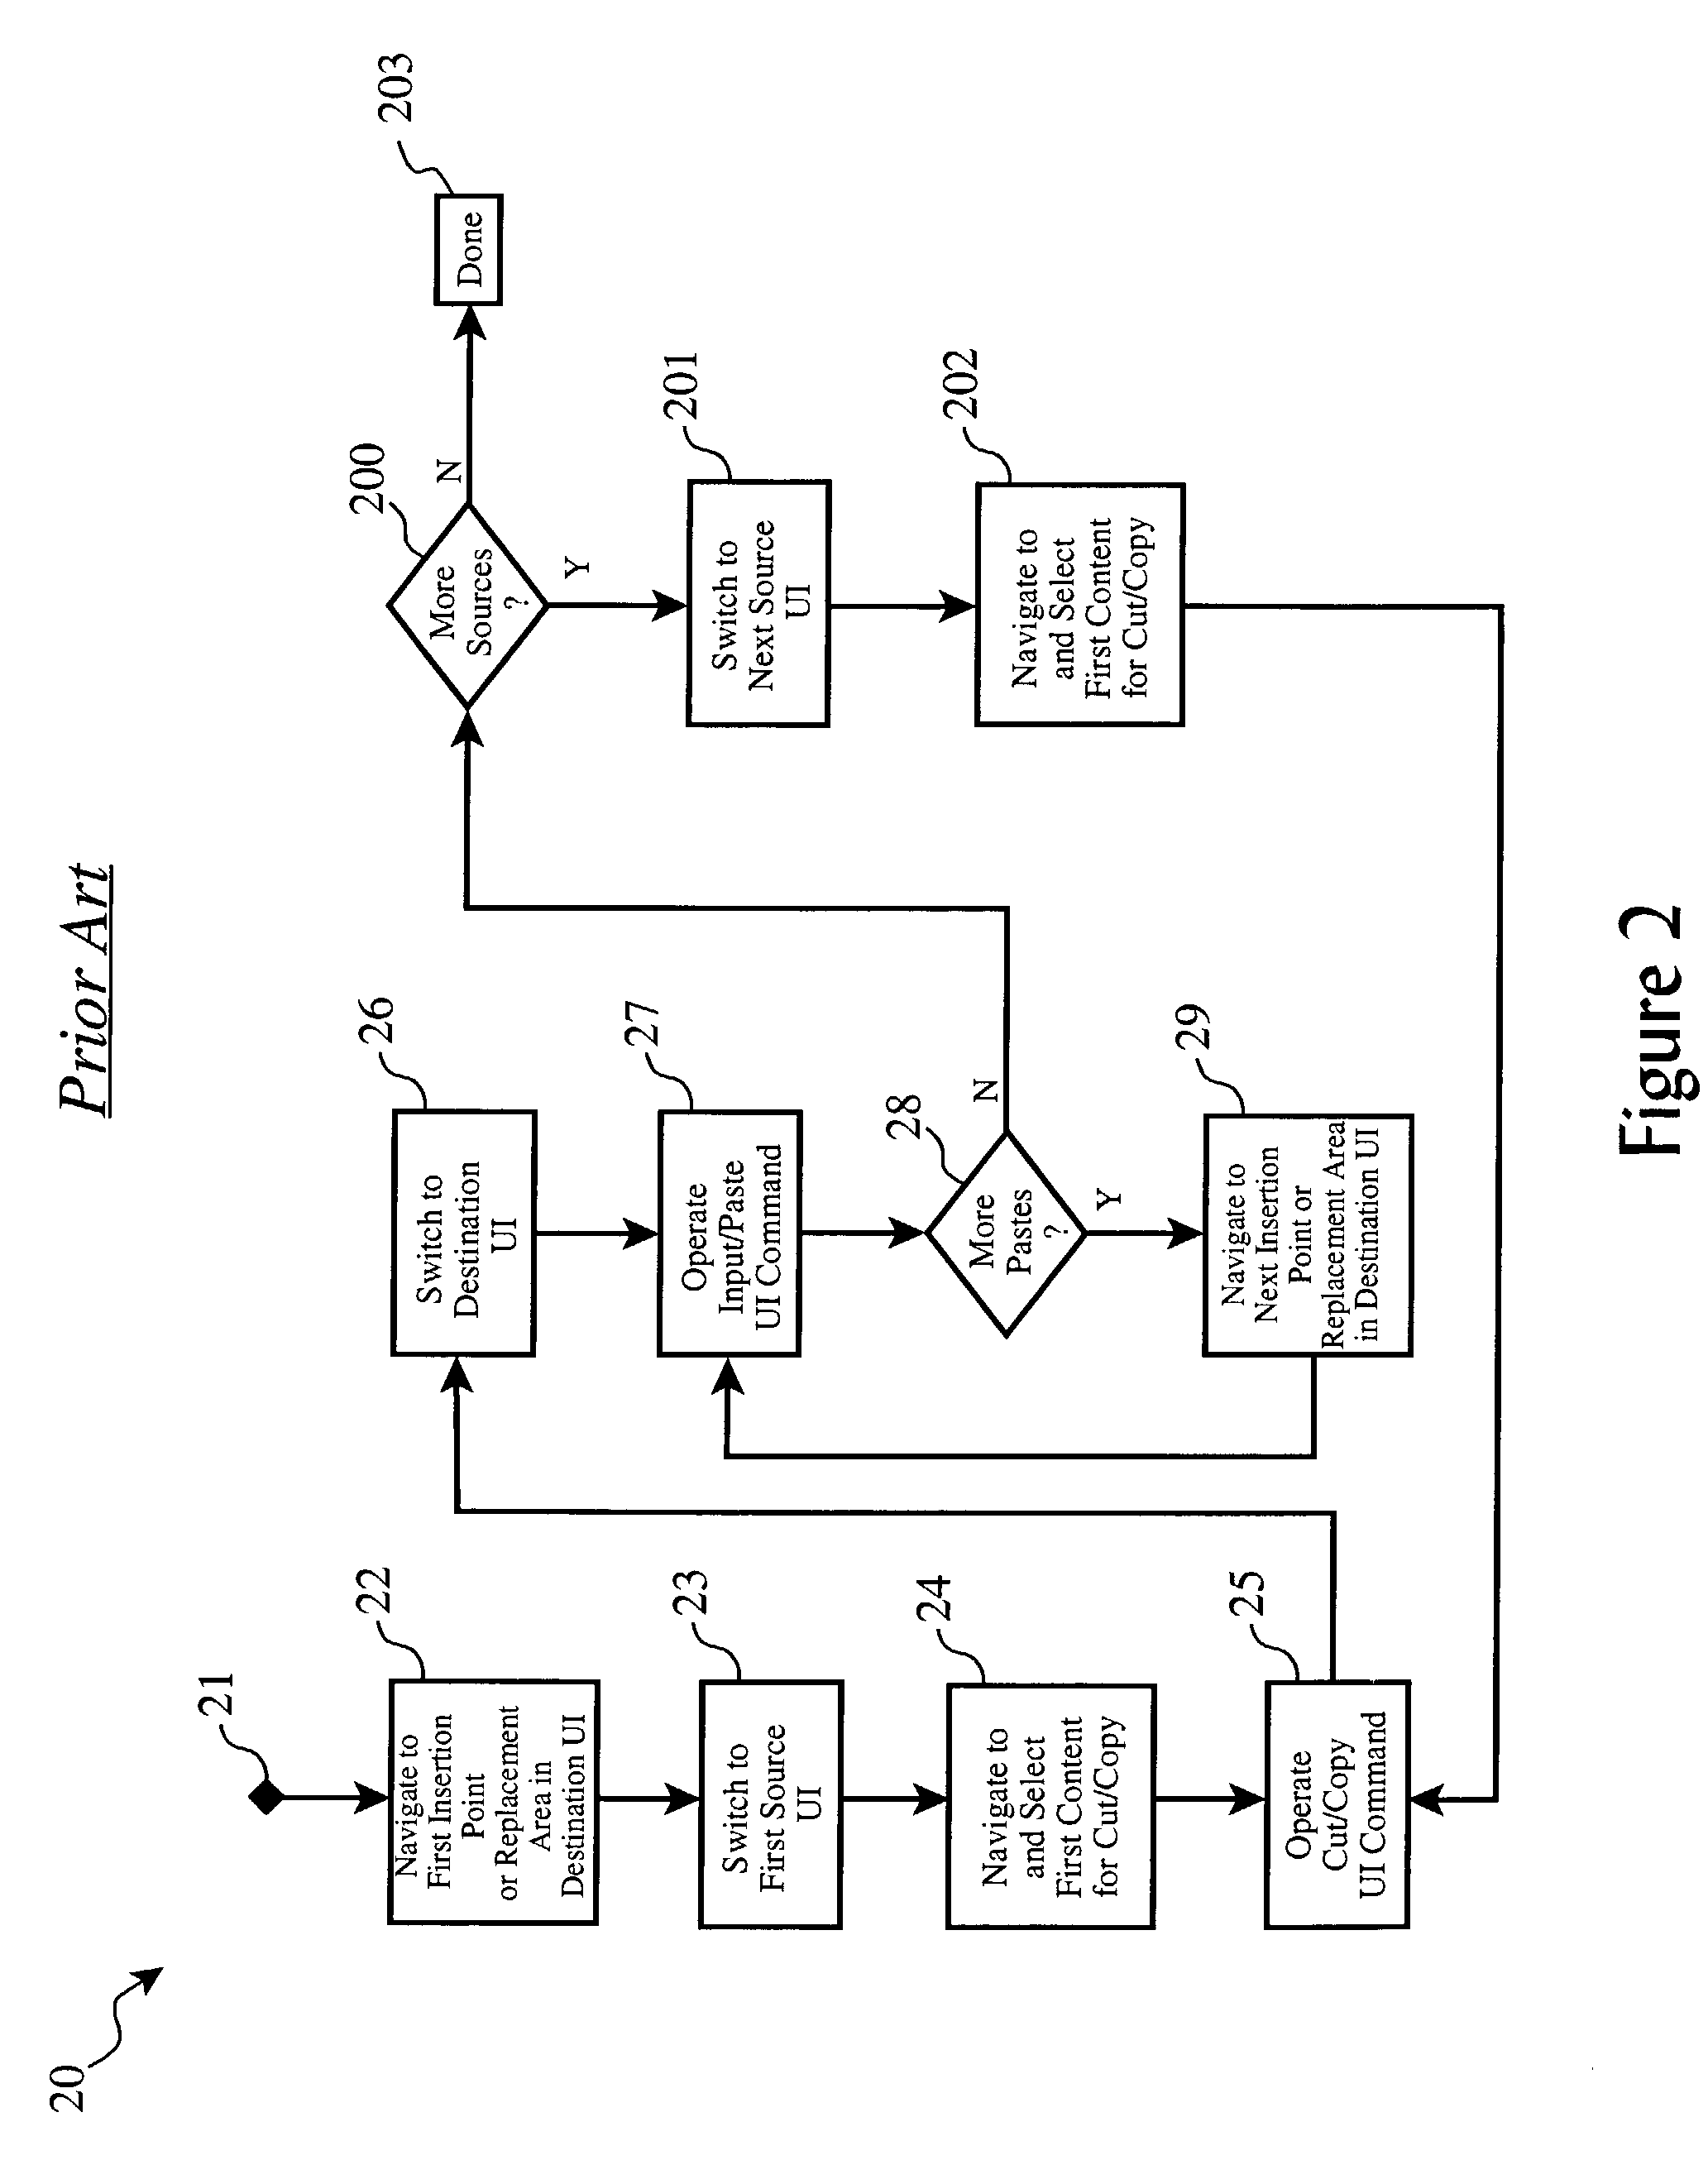 System and method for content and information transfer between program entities